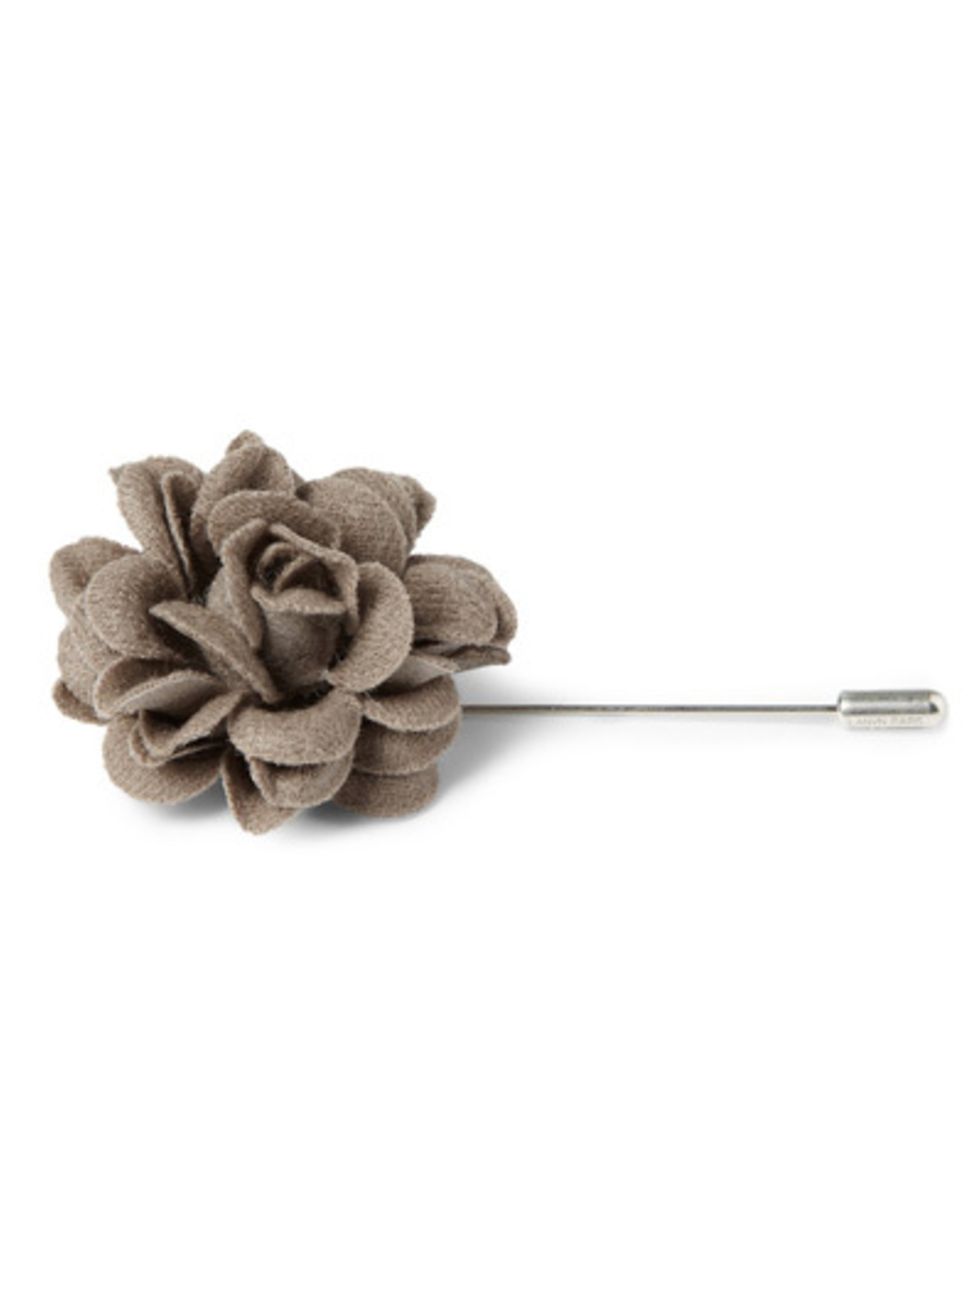 Petal, Pattern, Hair accessory, Artificial flower, Natural material, Still life photography, Silver, Knot, Hair tie, Steel, 